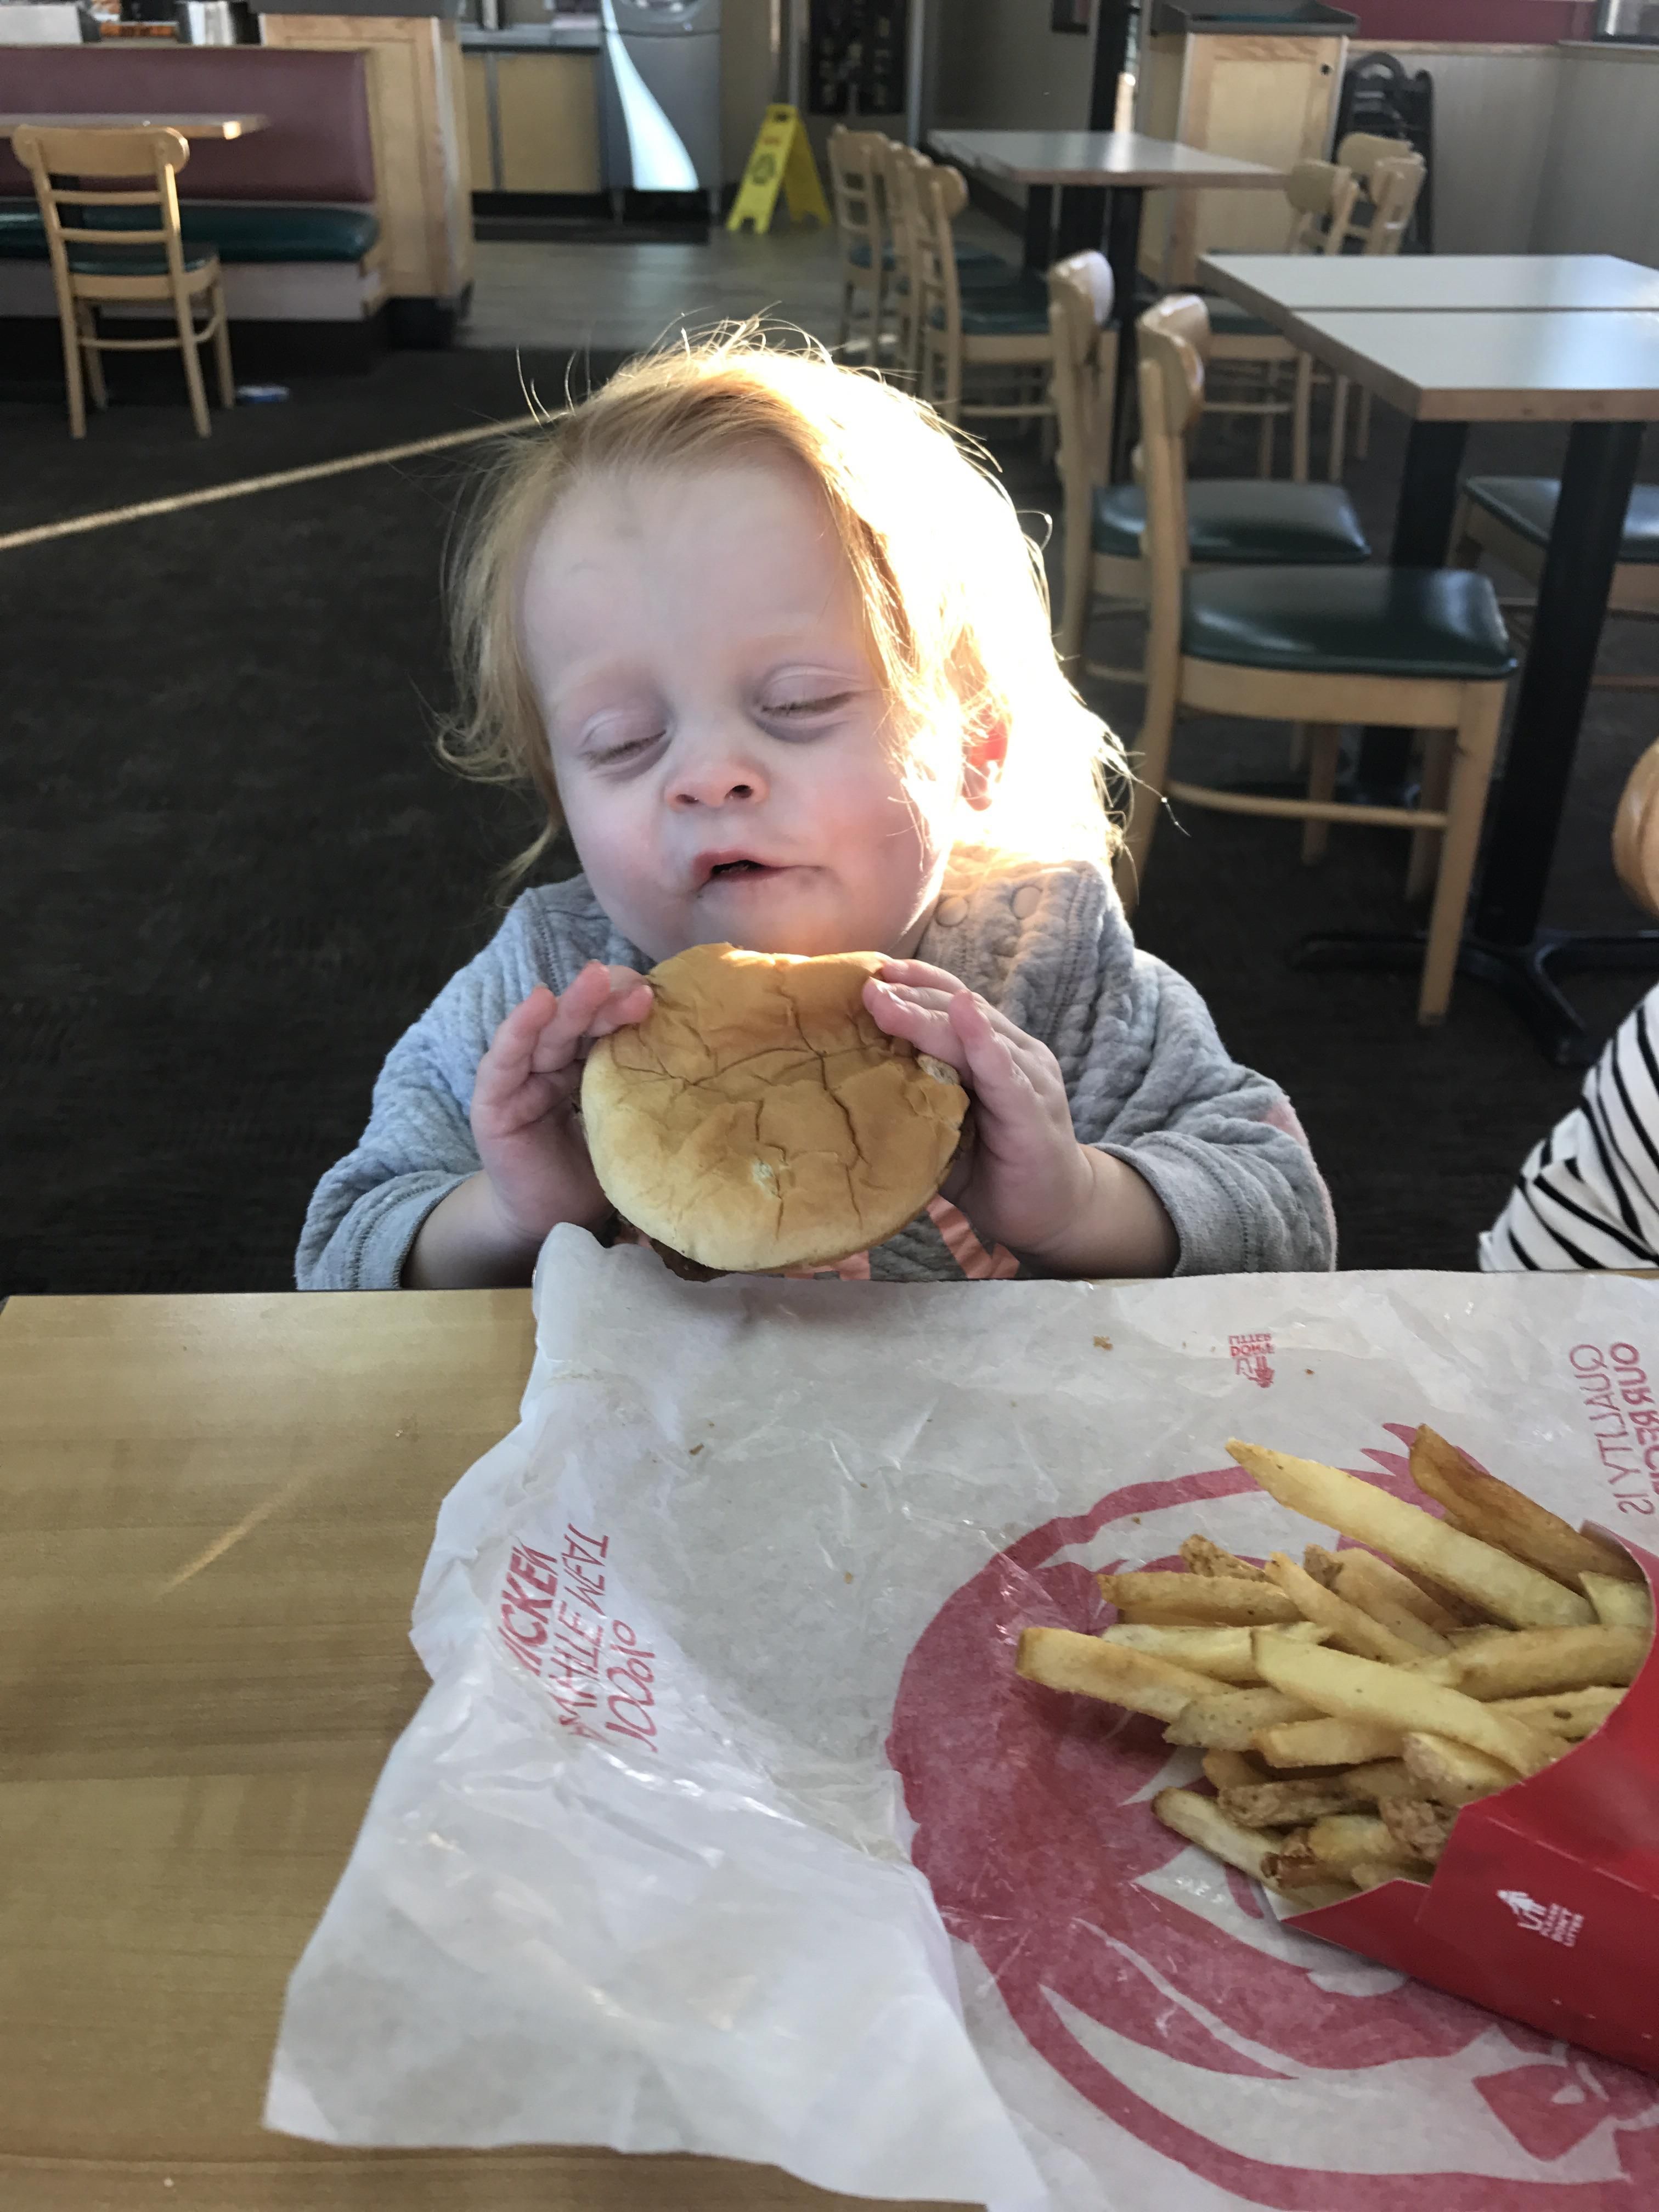 My daughter really enjoyed her first hamburger.